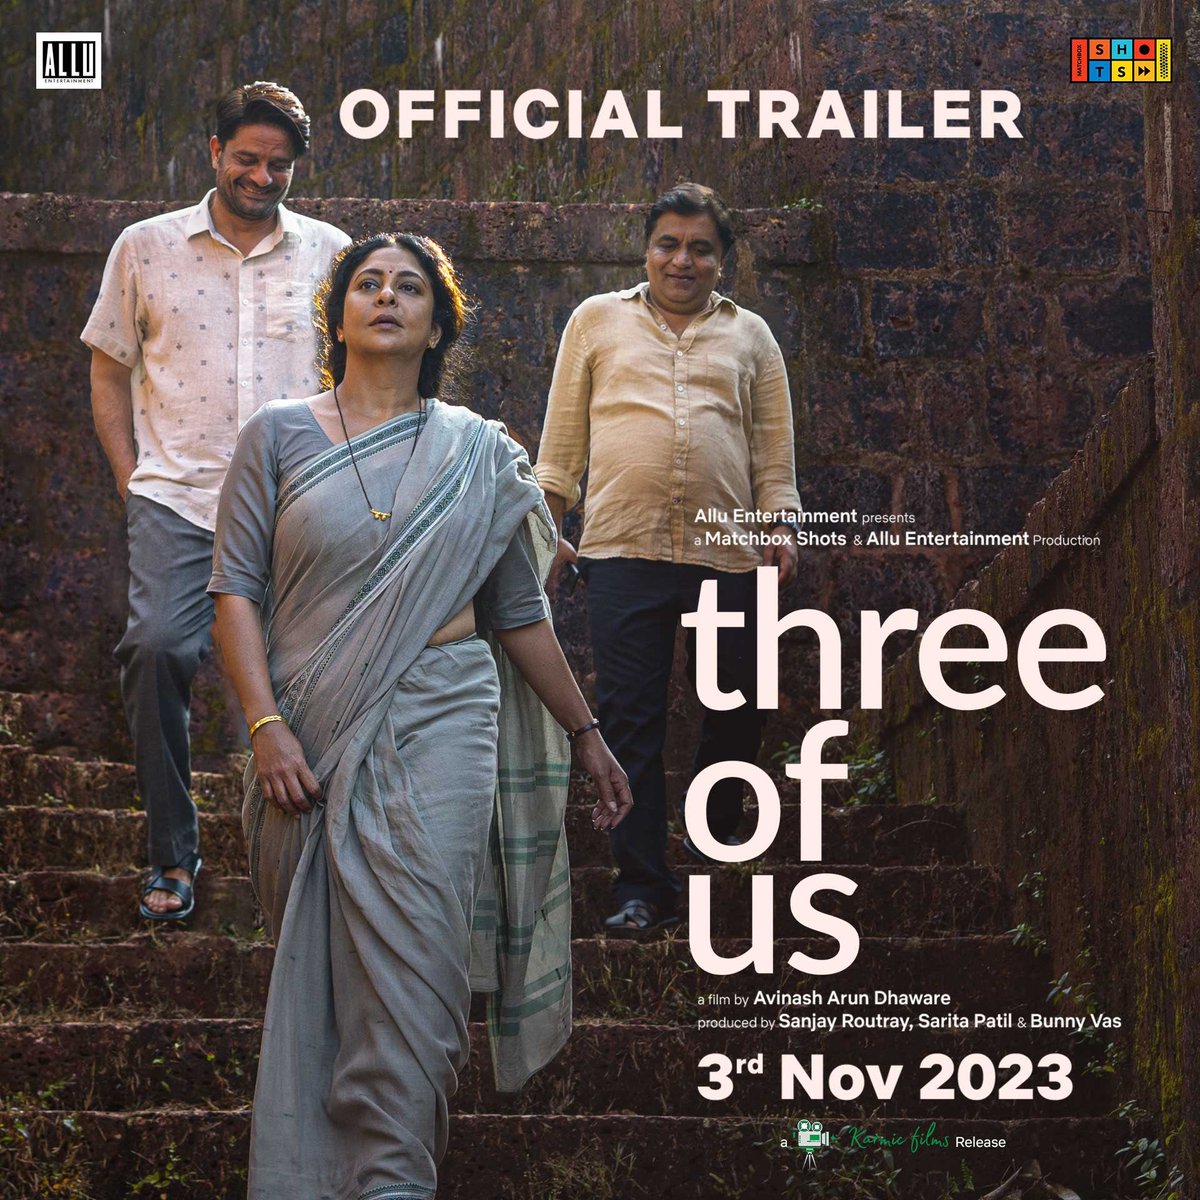 Three Of Us trailer is out now
Stars: #ShefaliShah, #JaideepAhlawat & #SwanandKirkire, In cinemas from Nov 3...
#ThreeOfUs
Directed by #AvinashArunDhaware
Produced by #SanjayRoutray, #SaritaPatil & #BunnyVas #AlluEntertainment
Trailer🔗: youtu.be/LGMsX_RzGl4